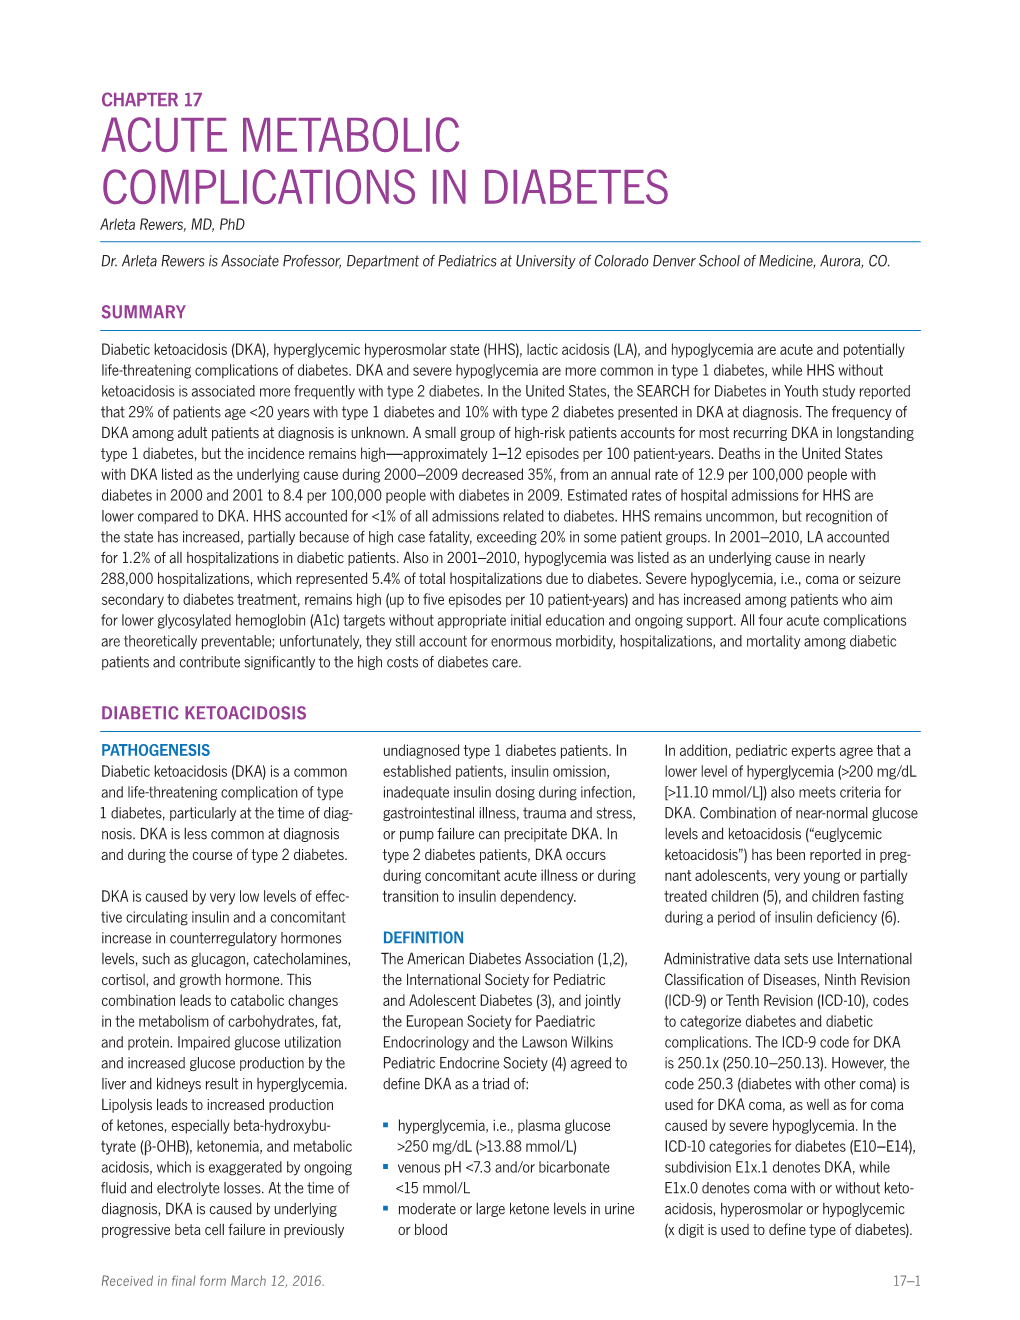 Chapter 17: Acute Metabolic Complications in Diabetes